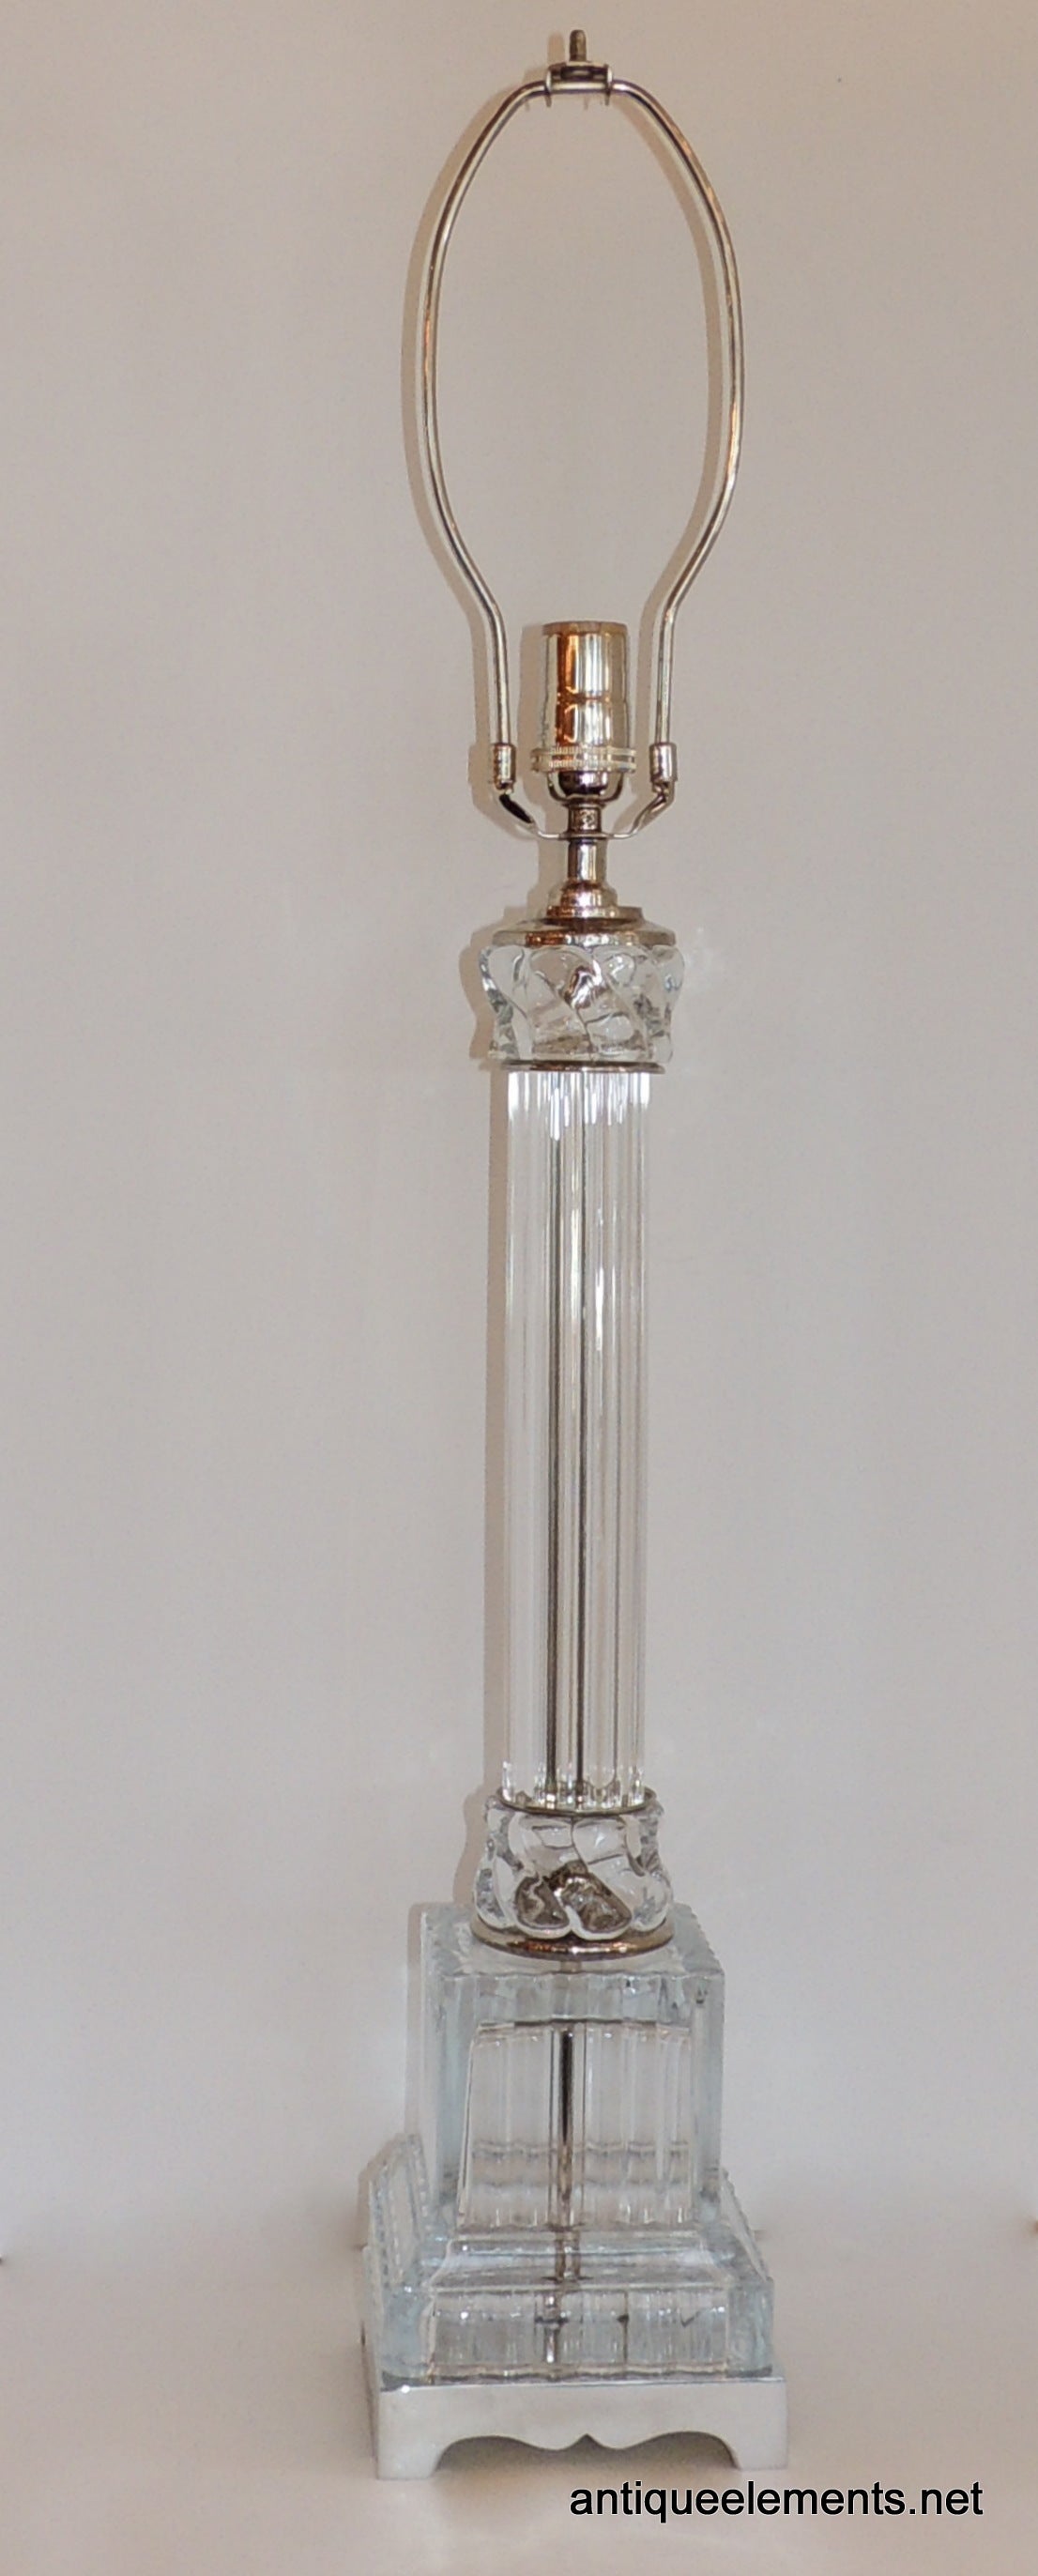 These Deco Style crystal lamps with chrome finish are perfect for the transitional room. Beautiful swirl crystal pattern at the top and bottom frame the elegant linear design on the center and repeated on the pedestal base. The crystal is